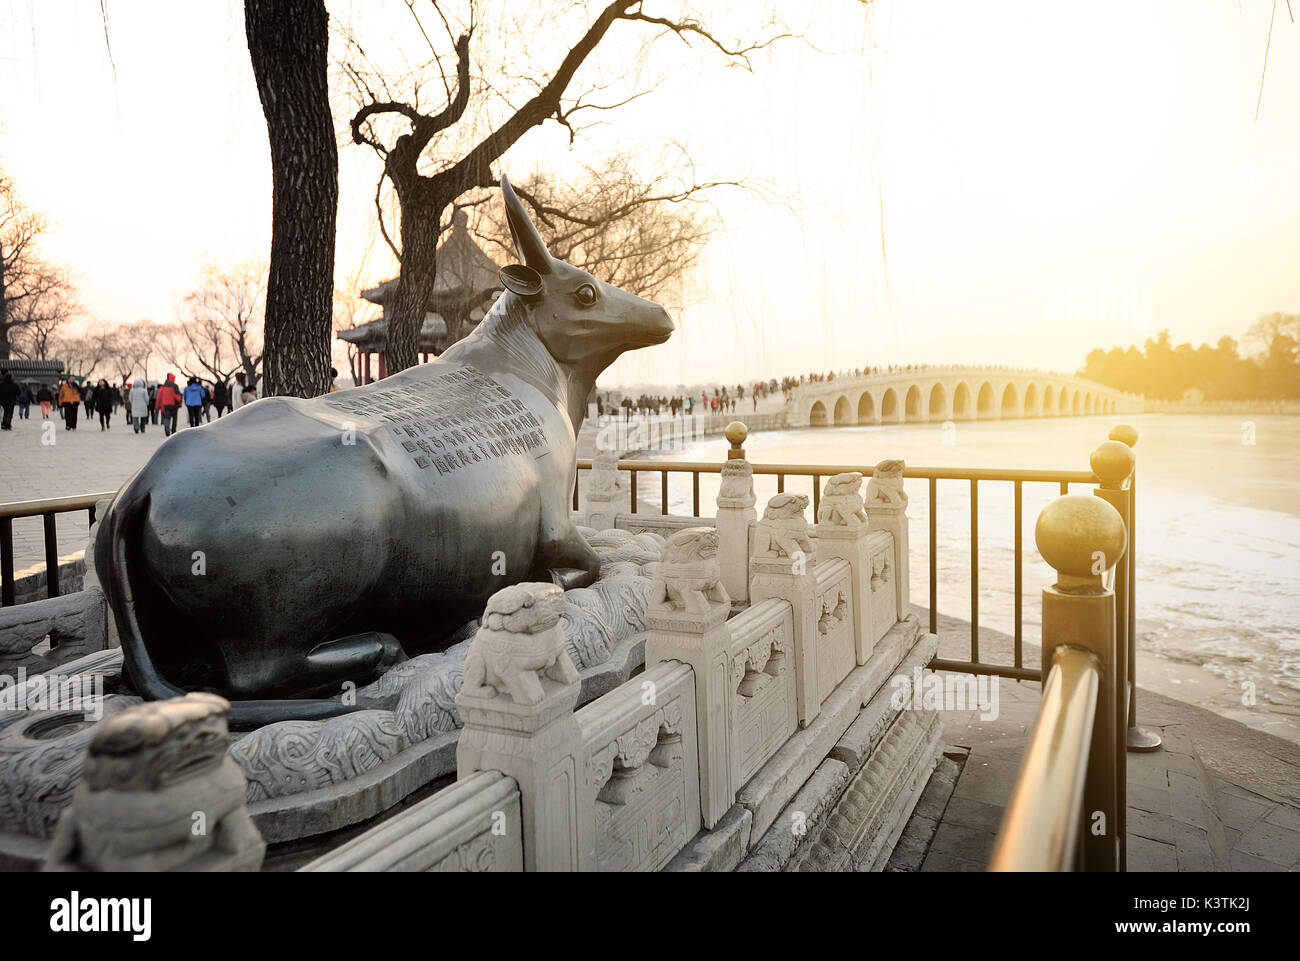 The Summer Palace in winter,Kunming Lake has been frozen. Stock Photo